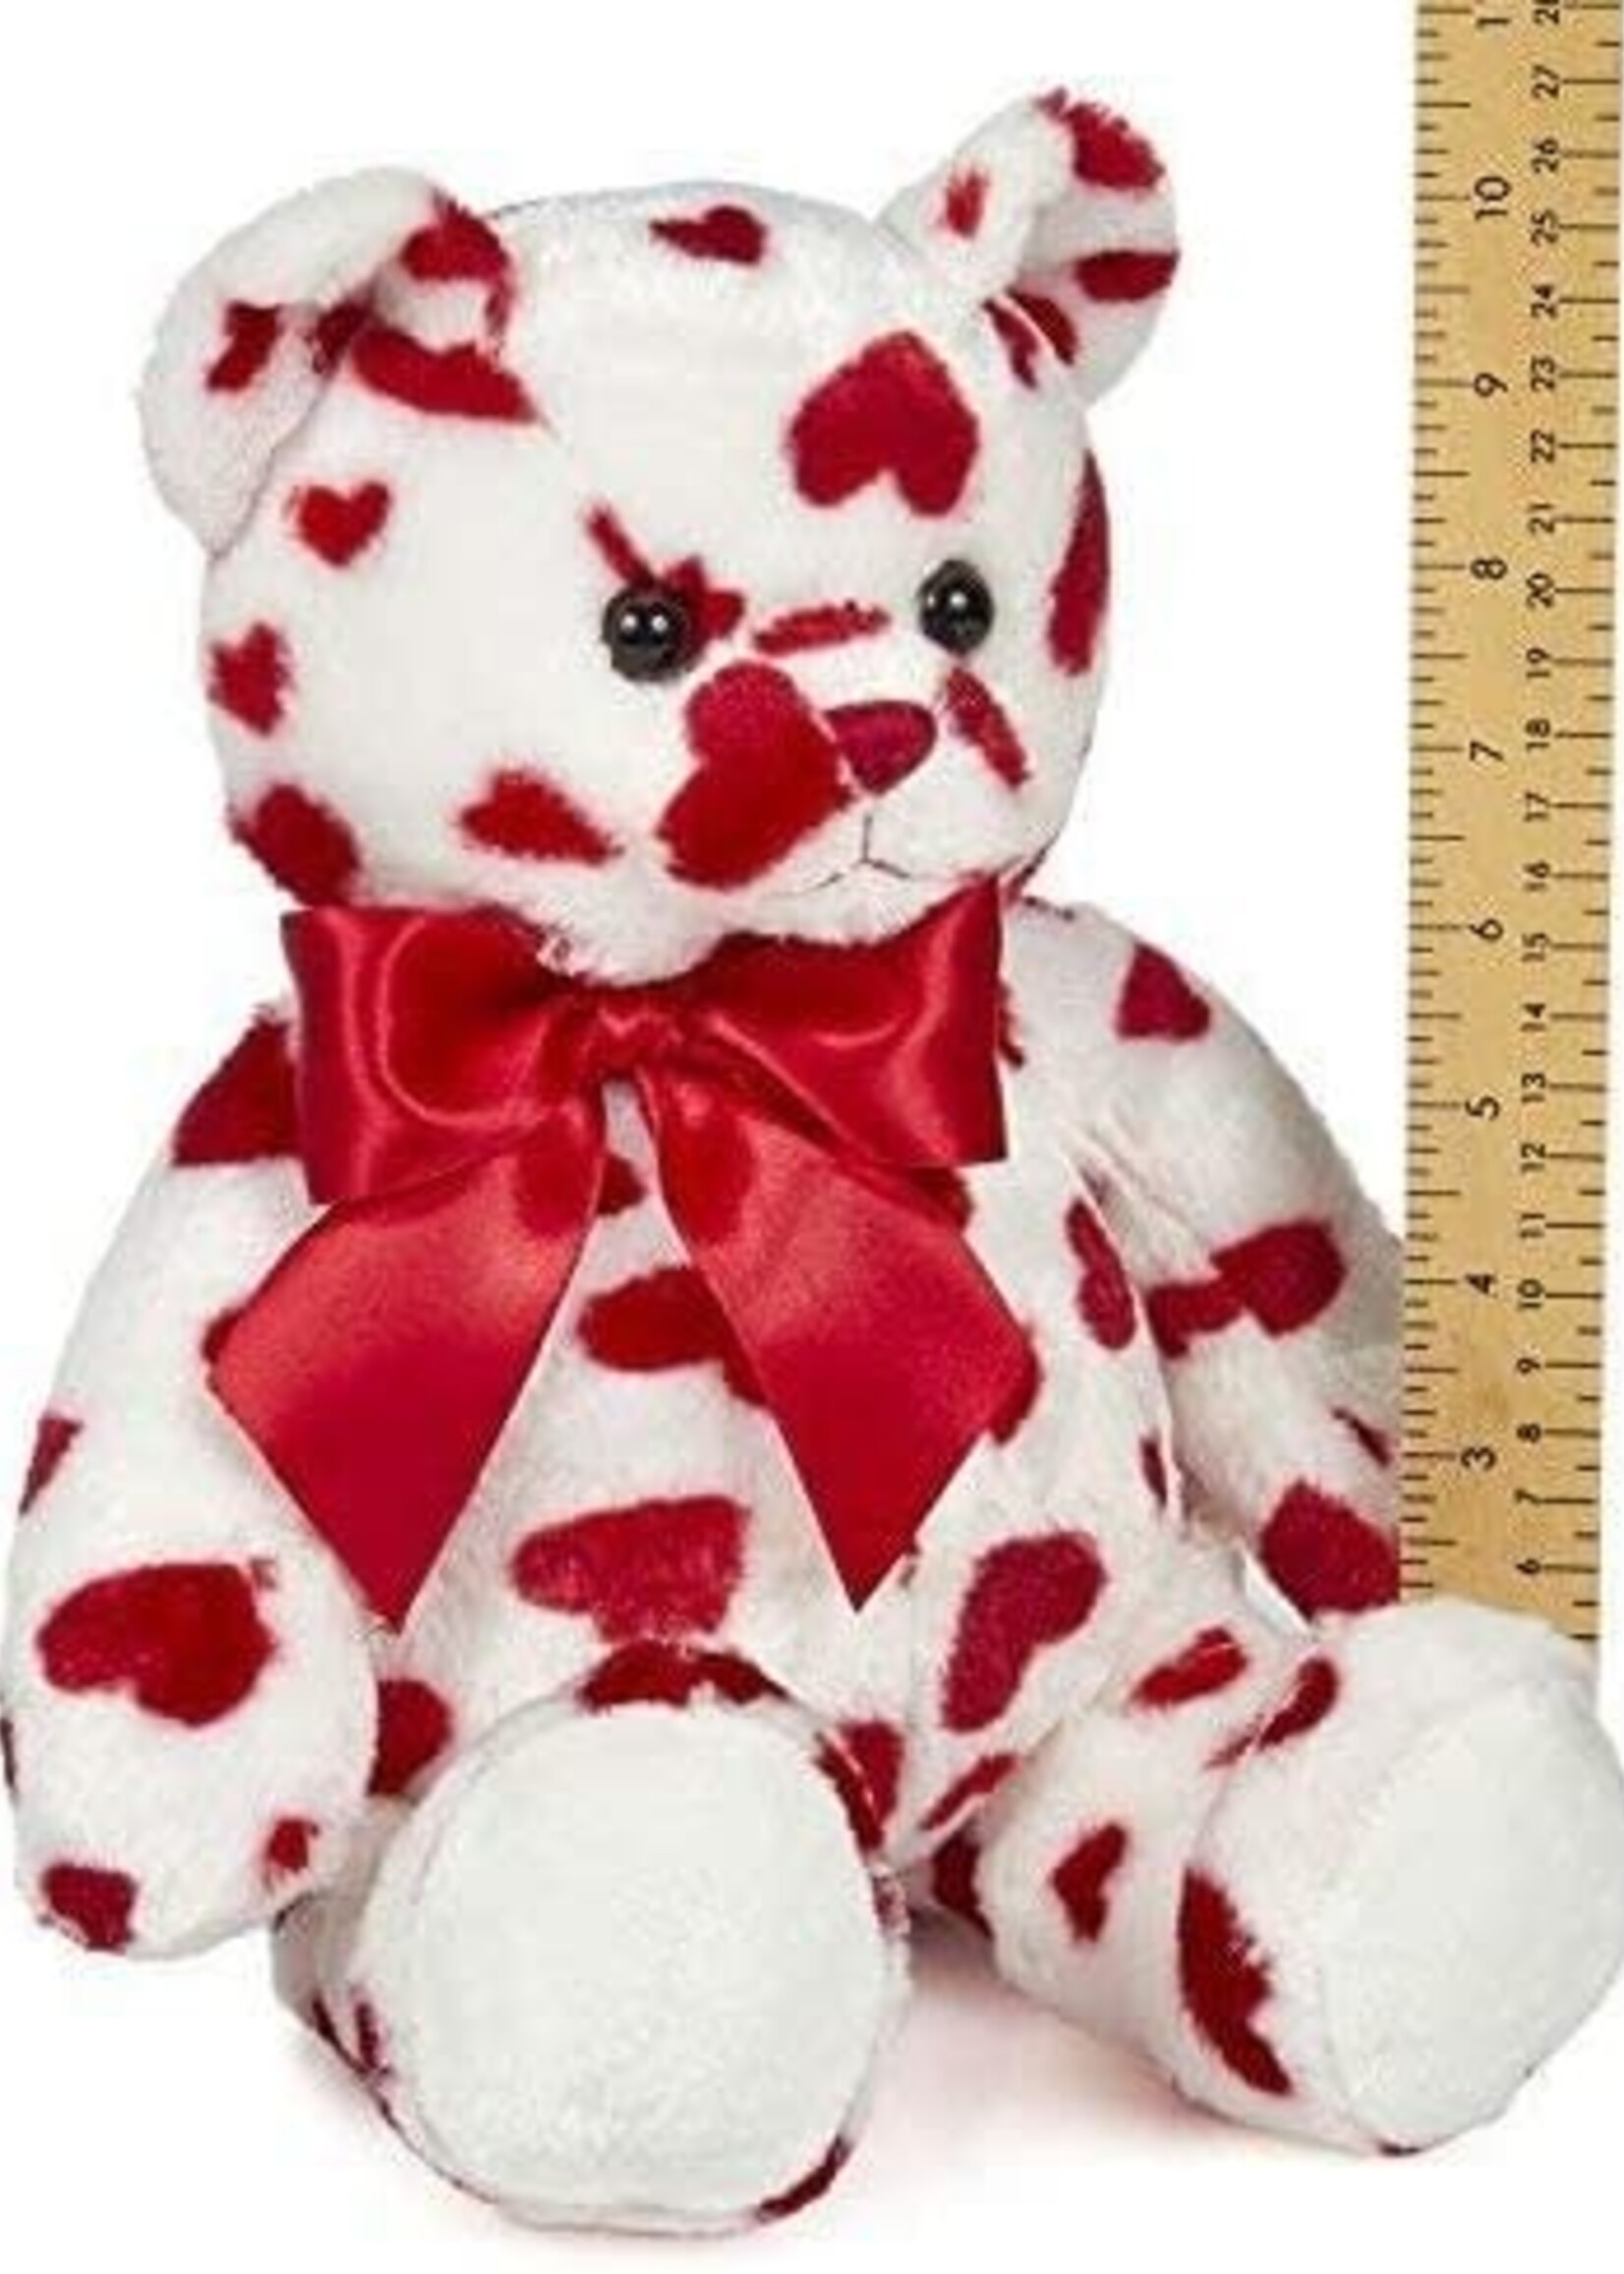 Lil' Cutie White Plush Stuffed Animal Teddy Bear with Hearts, 14 inches